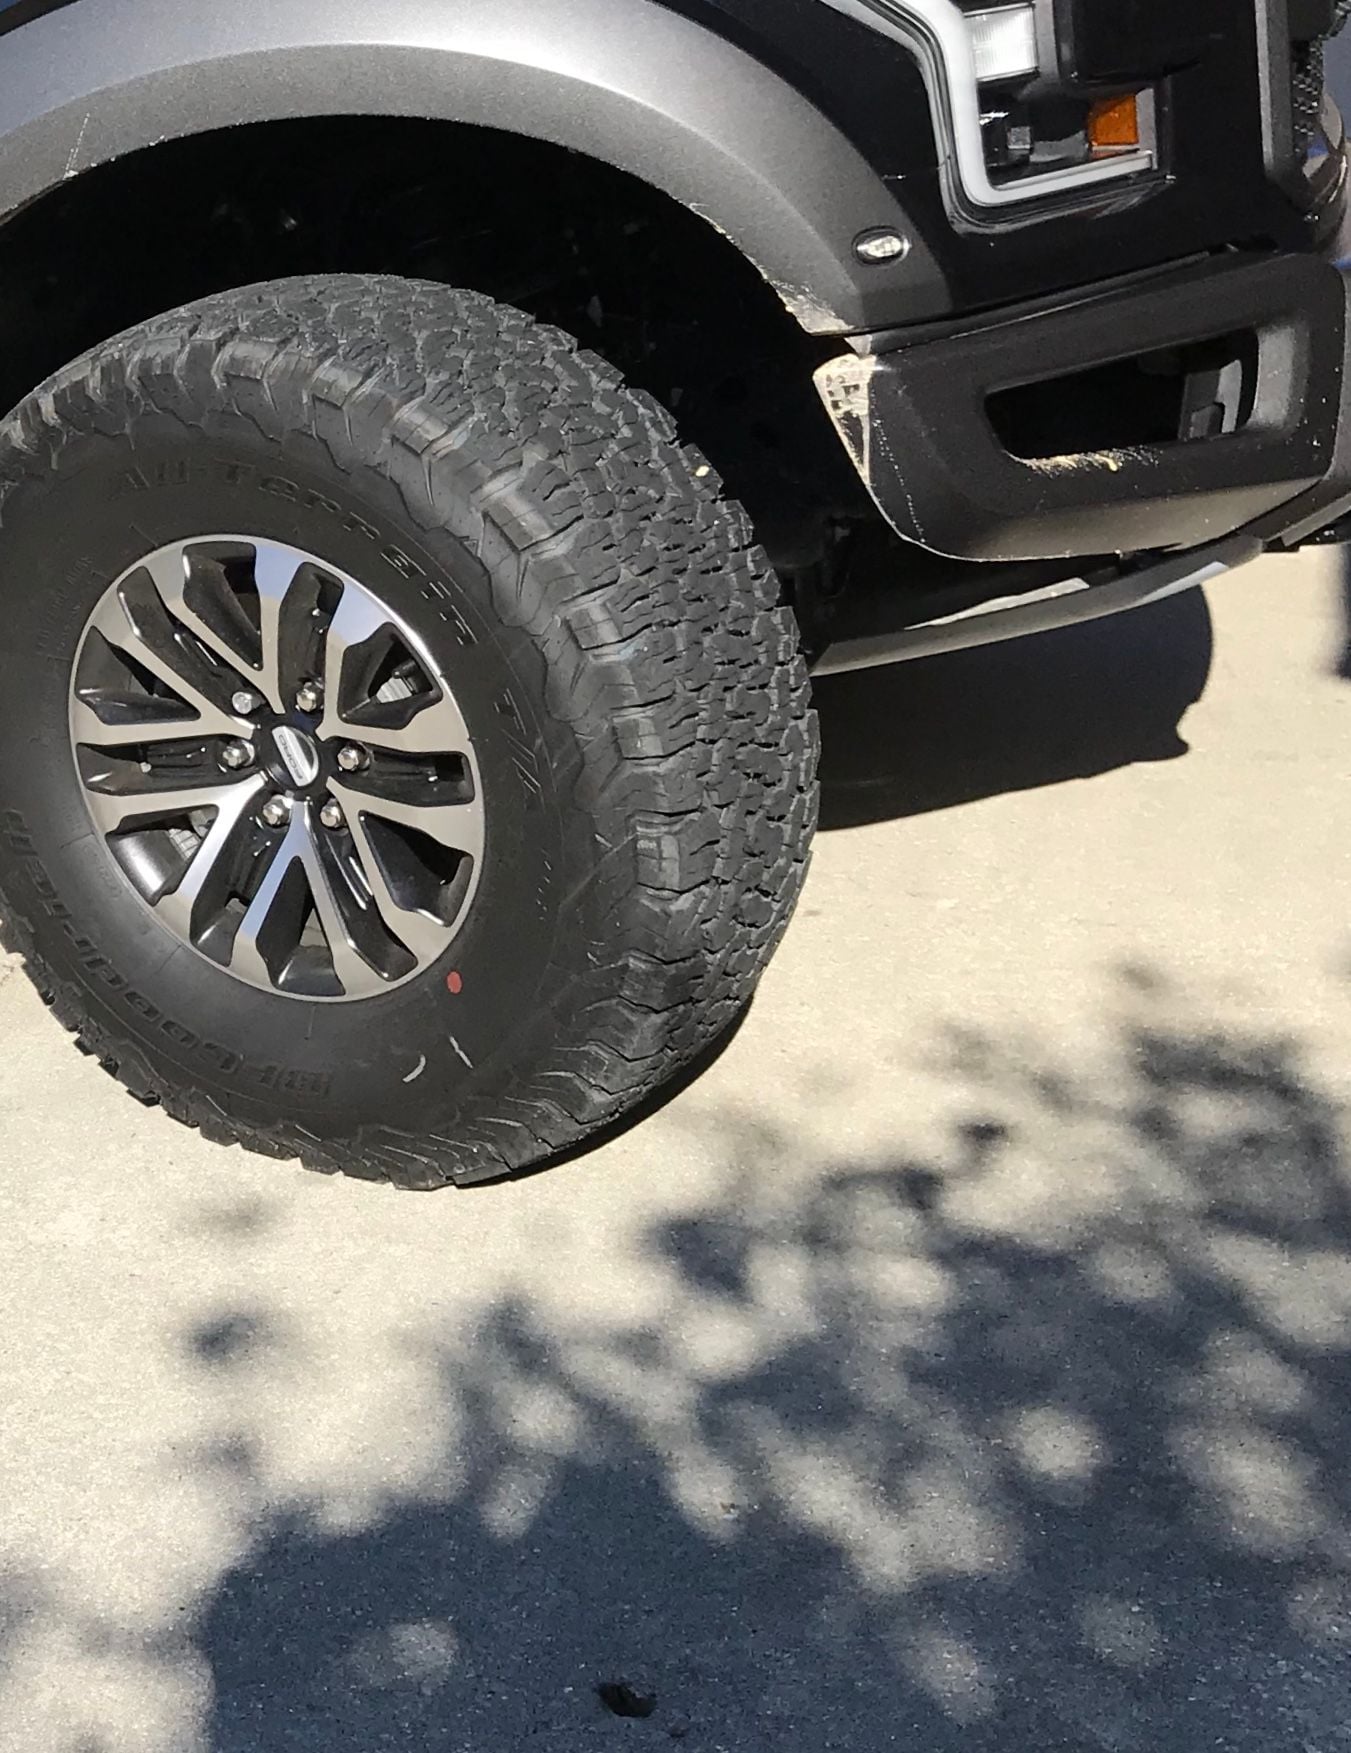 Wheels and Tires/Axles - 2019 17" Raptor wheels only with lug nuts no tpms - New - 2015 to 2020 Ford F-150 - D.s, LA 70726, United States